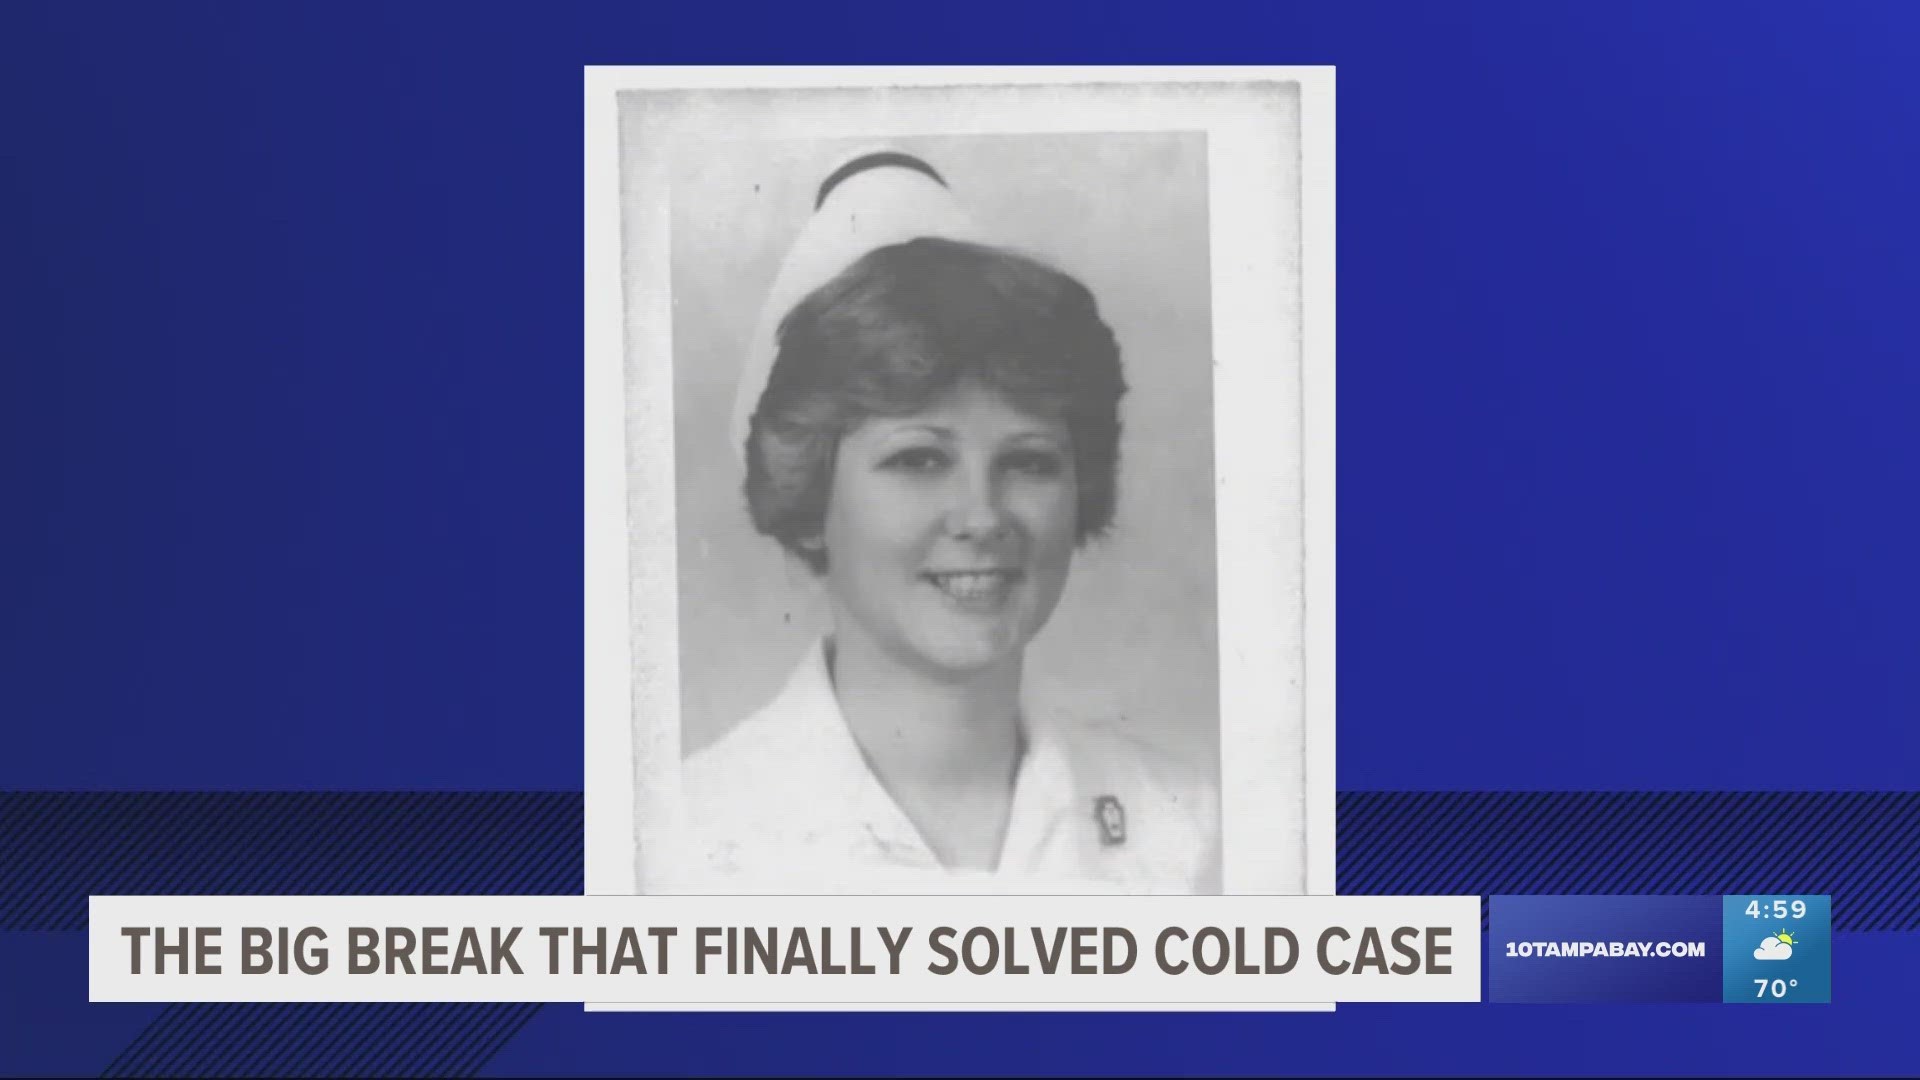 According to the Polk County sheriff, the murder wasn't solved right away because of the lack of DNA genealogy technology in 1986.